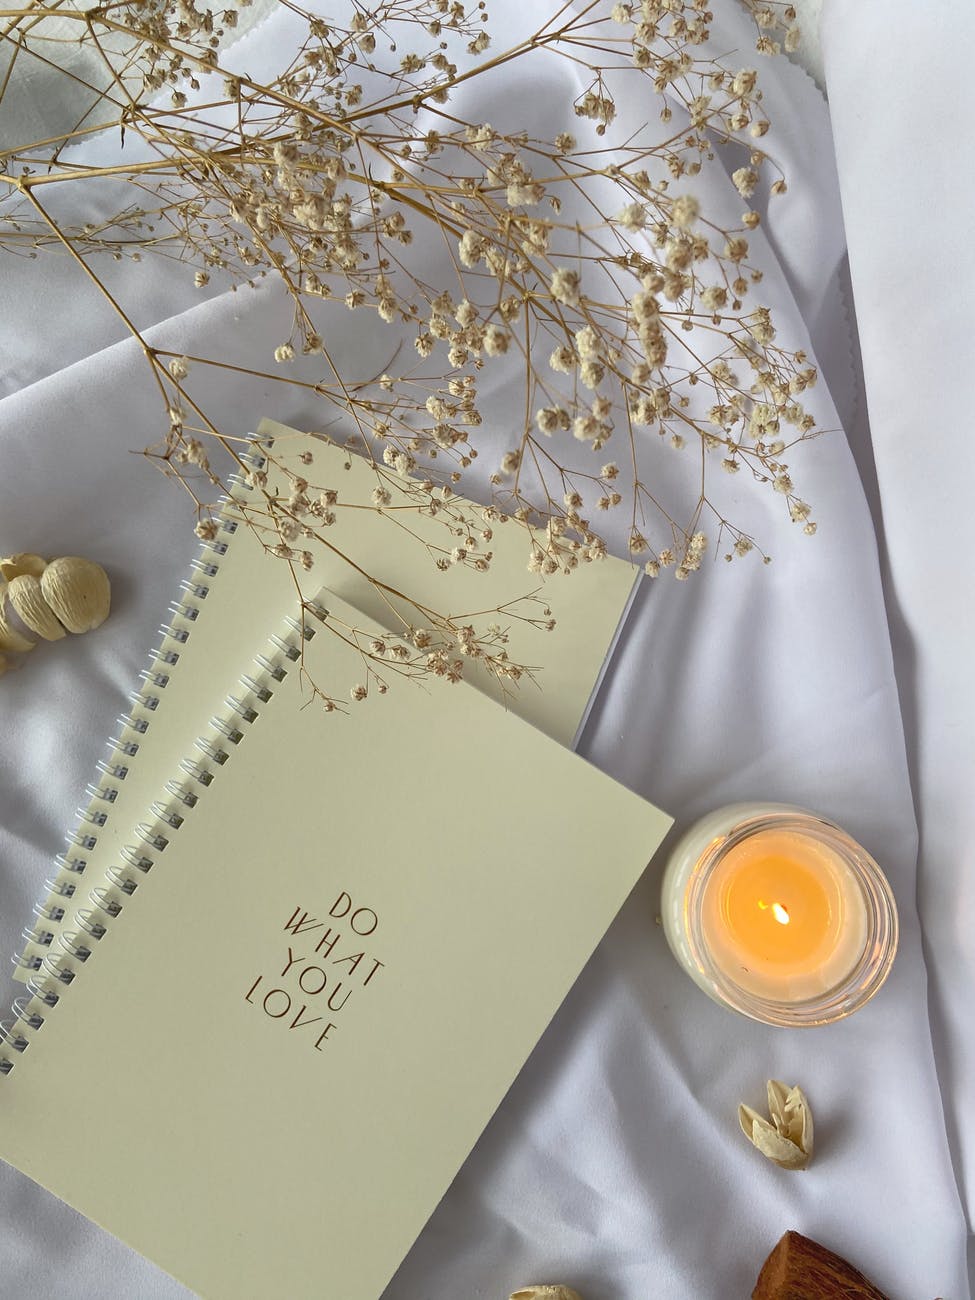 spiral notebooks placed on white cloth with burning candle